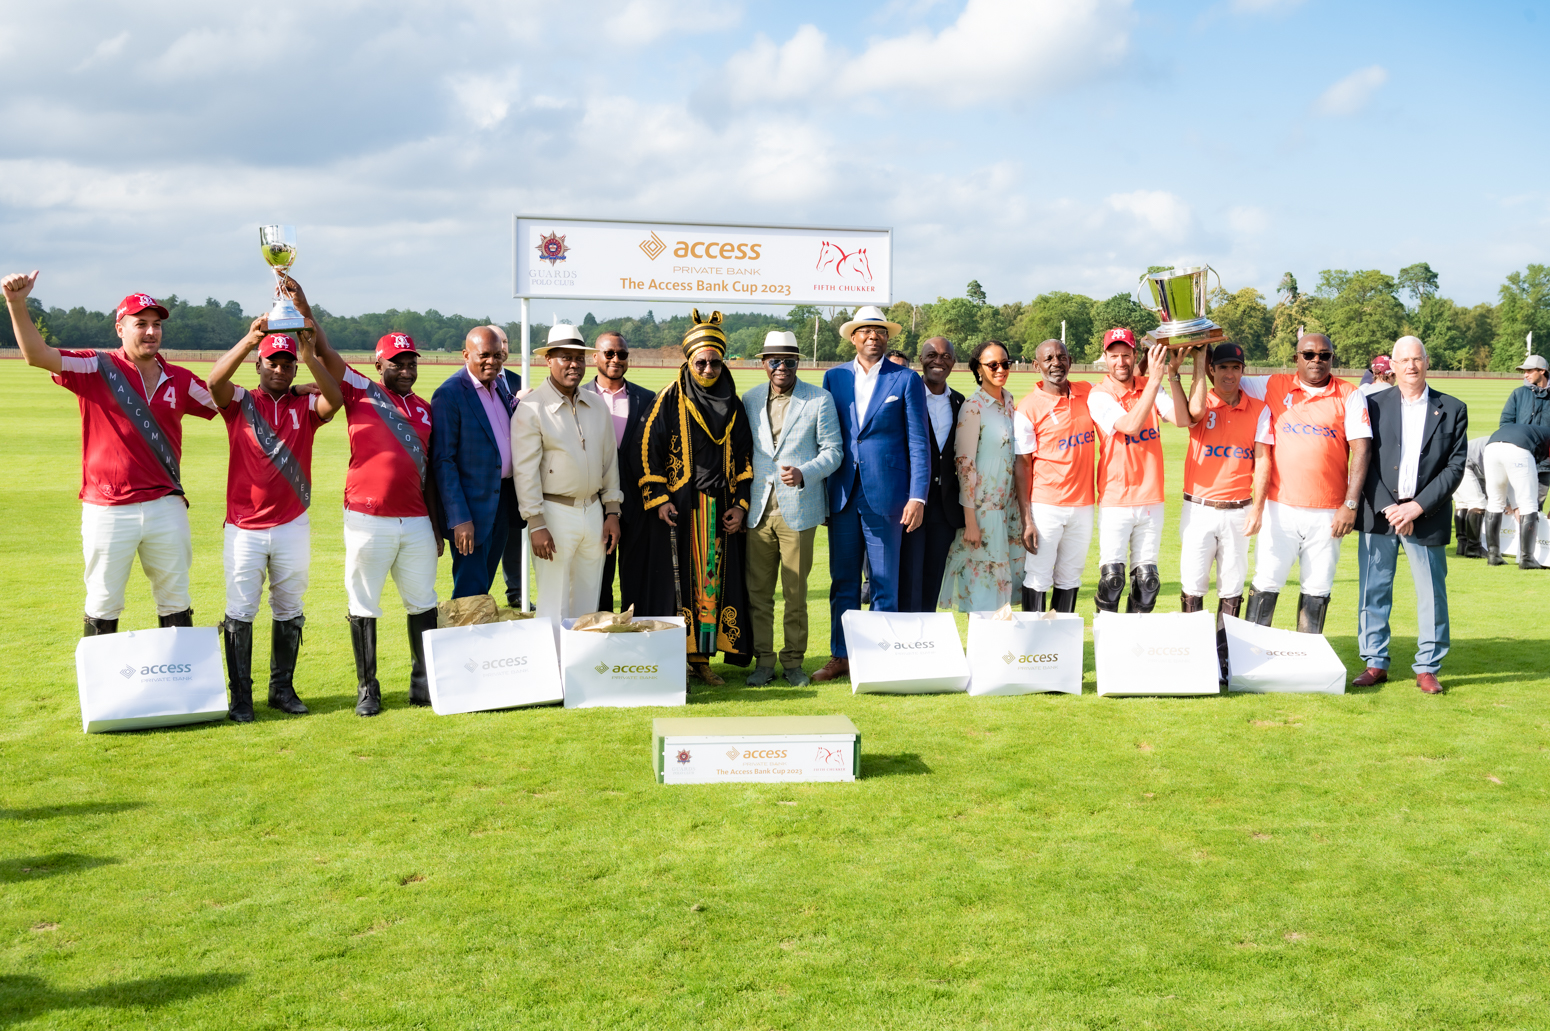 UK Polo Day: Access Holdings raises funds to secure brighter future for African children